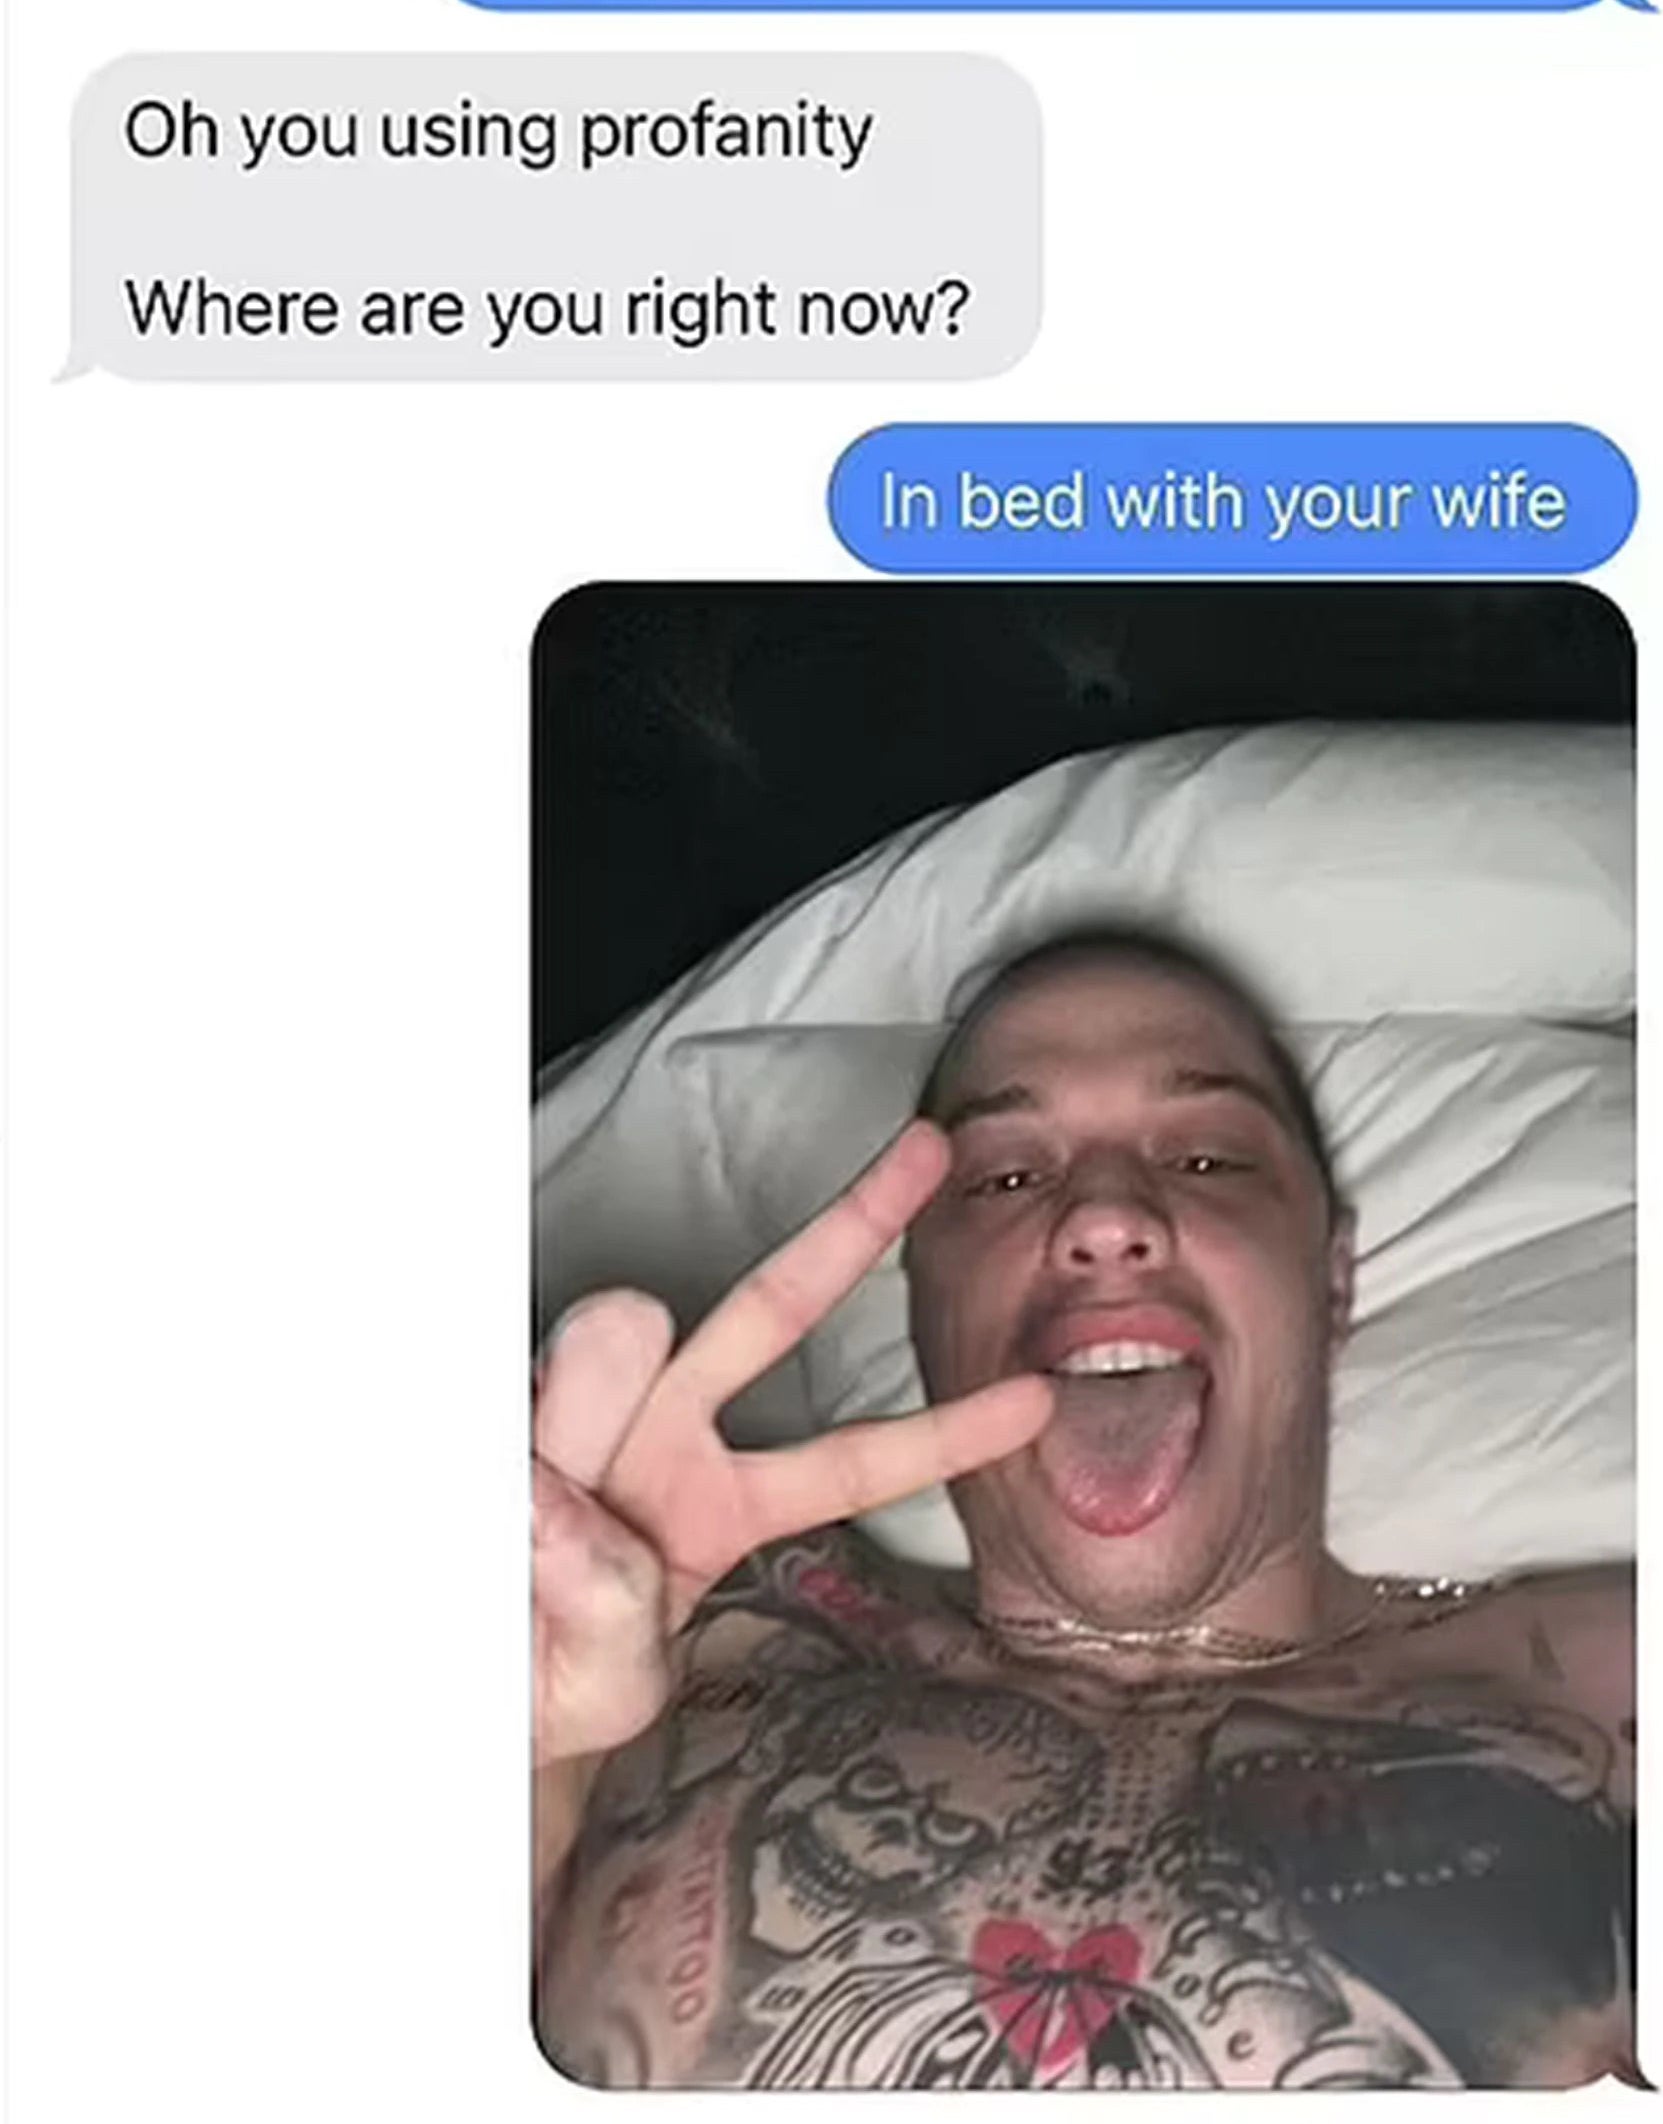 The text from Pete in bed